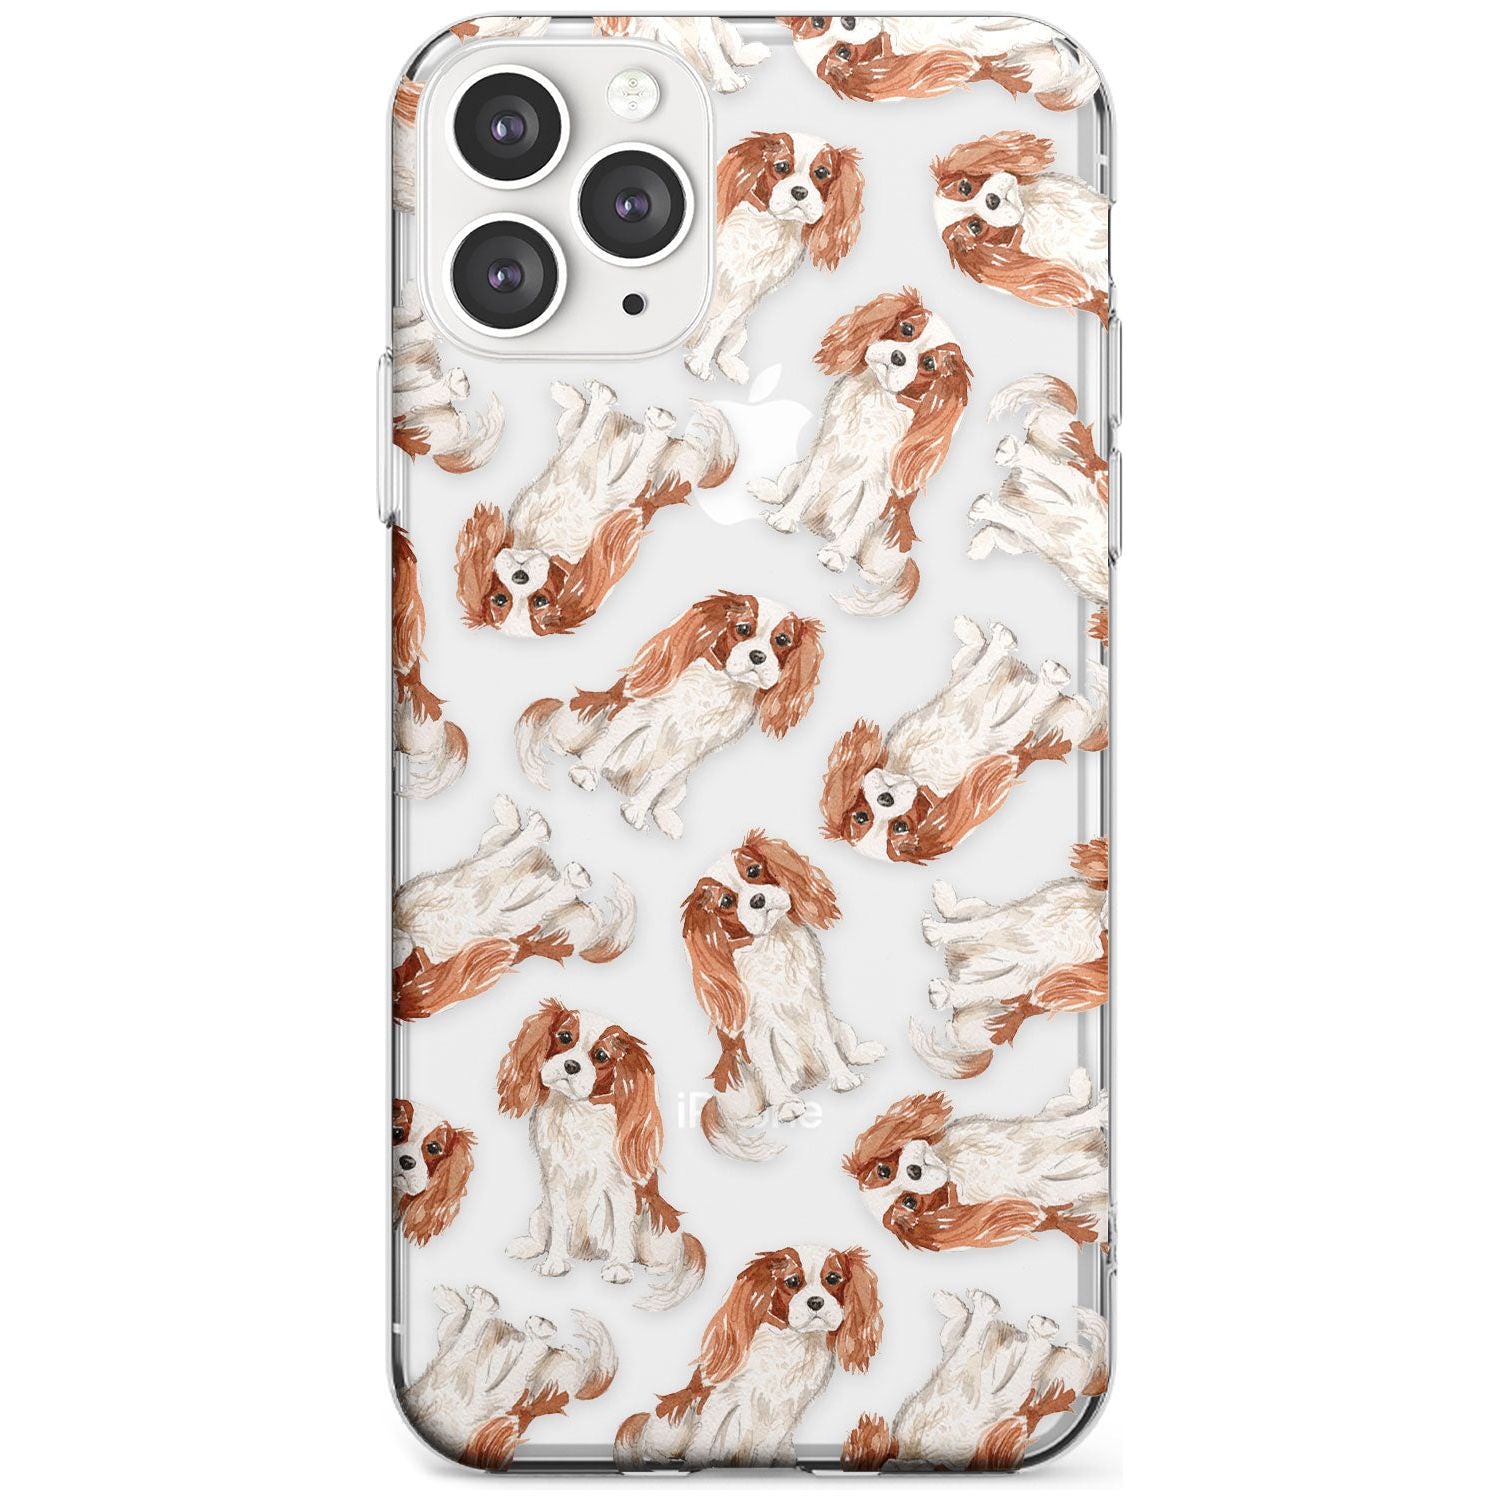 Cavalier King Charles Spaniel Dog Pattern Slim TPU Phone Case for iPhone 11 Pro Max